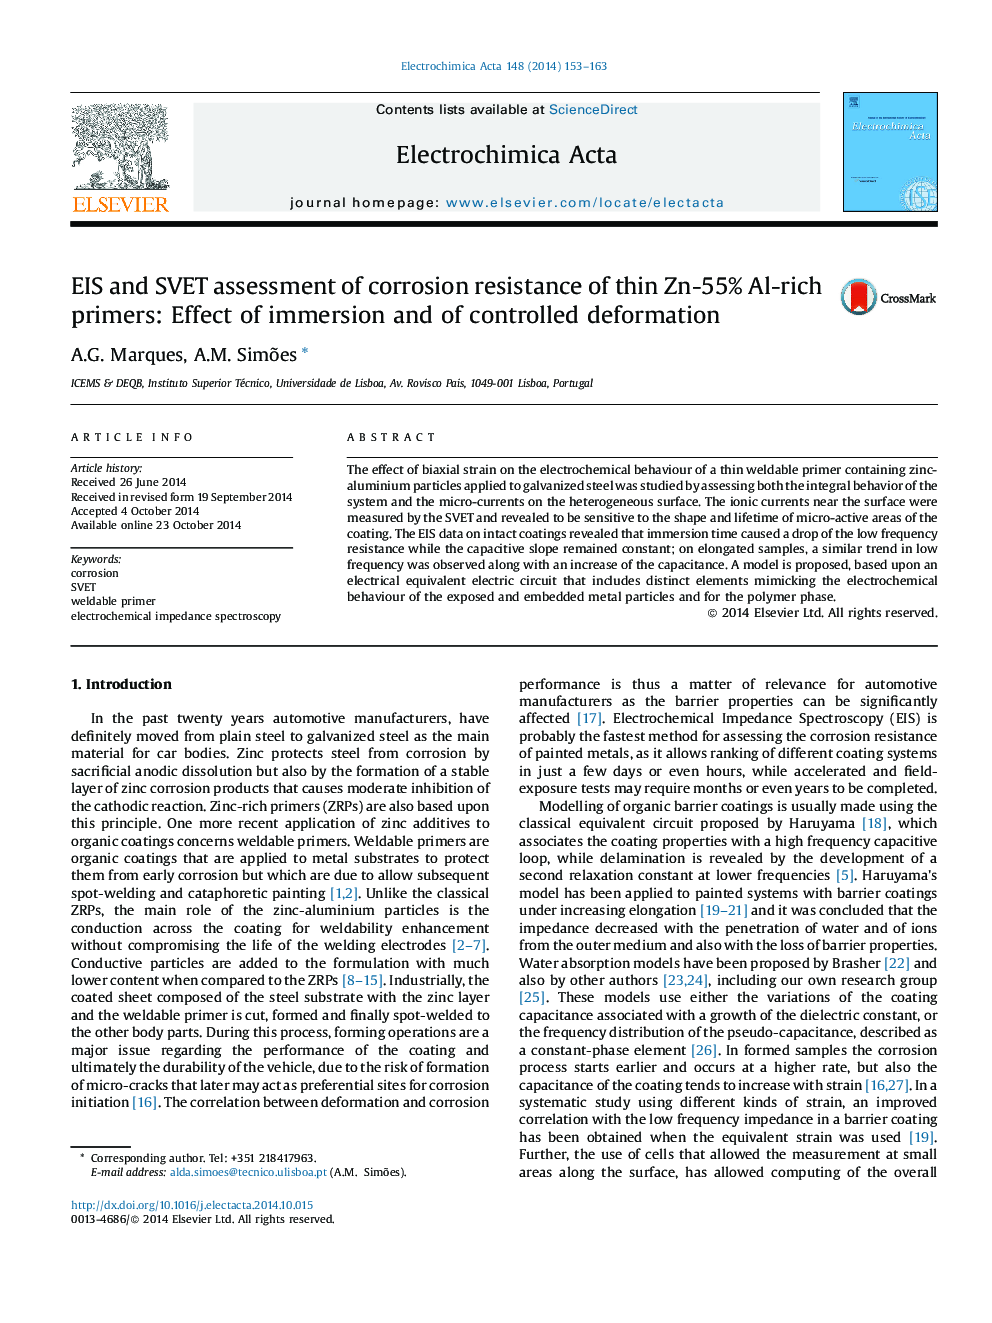 EIS and SVET assessment of corrosion resistance of thin Zn-55% Al-rich primers: Effect of immersion and of controlled deformation